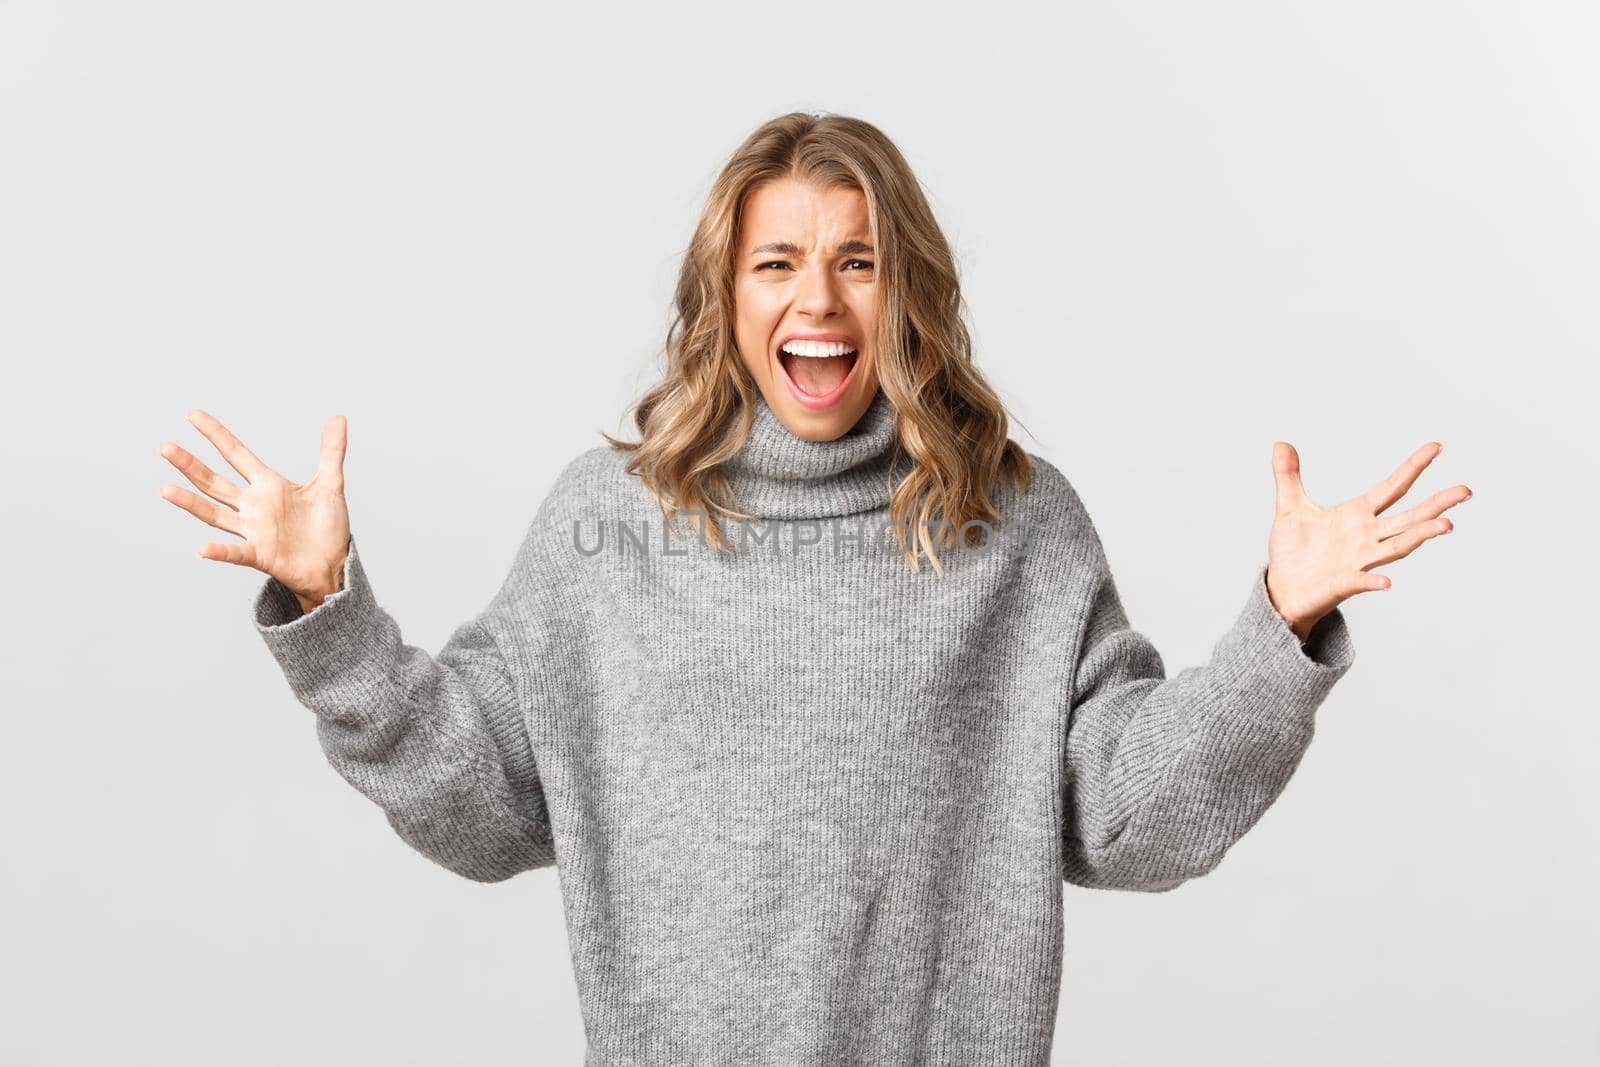 Image of distressed young woman screaming and shaking hands, standing emotional against white background.